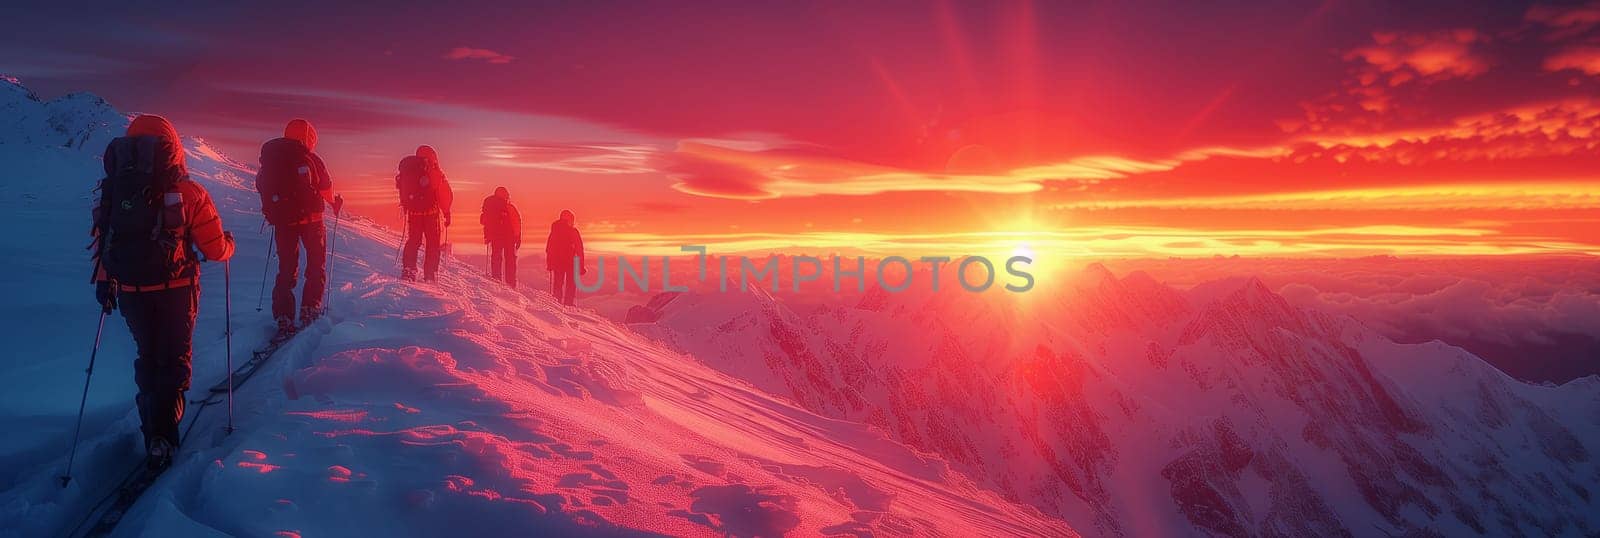 As the group of people walked on the snowy hill, the orange afterglow painted the sky in shades of red, creating a beautiful natural landscape at dusk